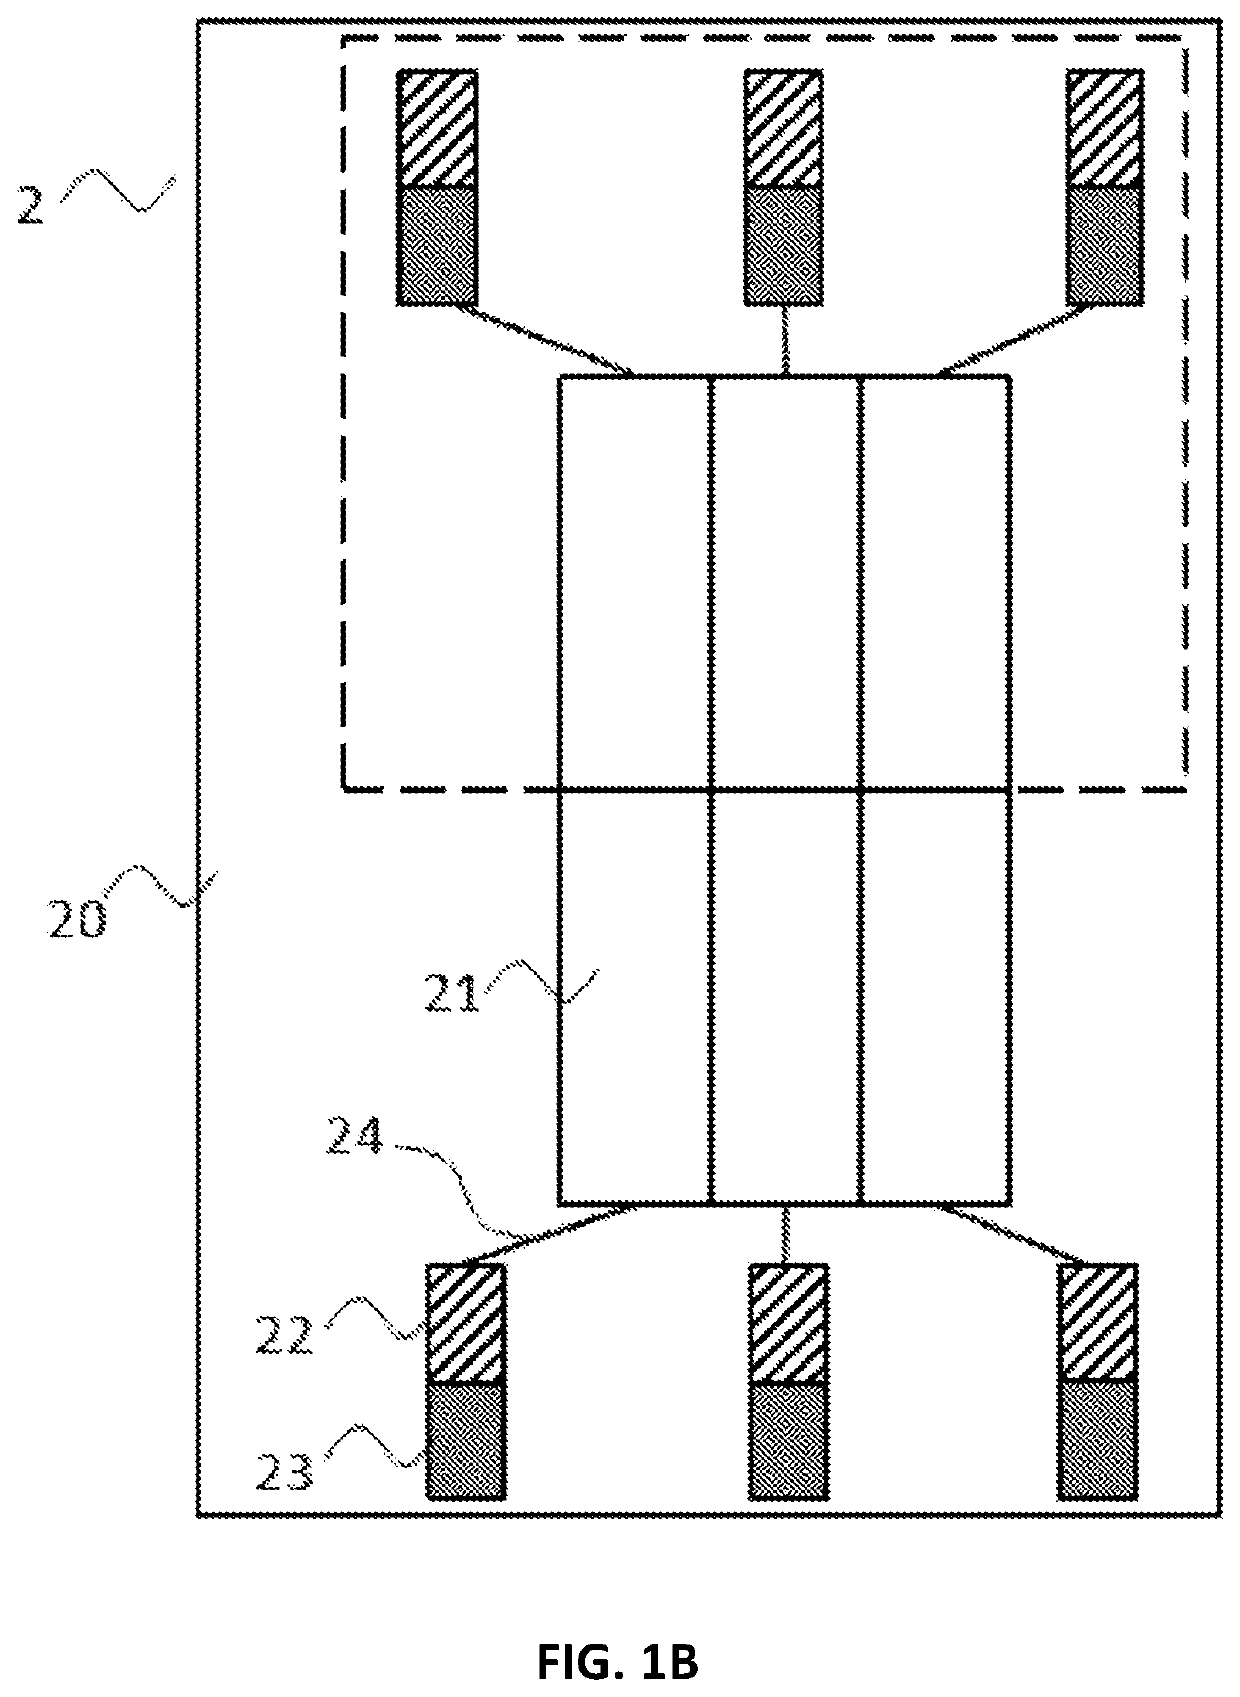 Display assembly and display device